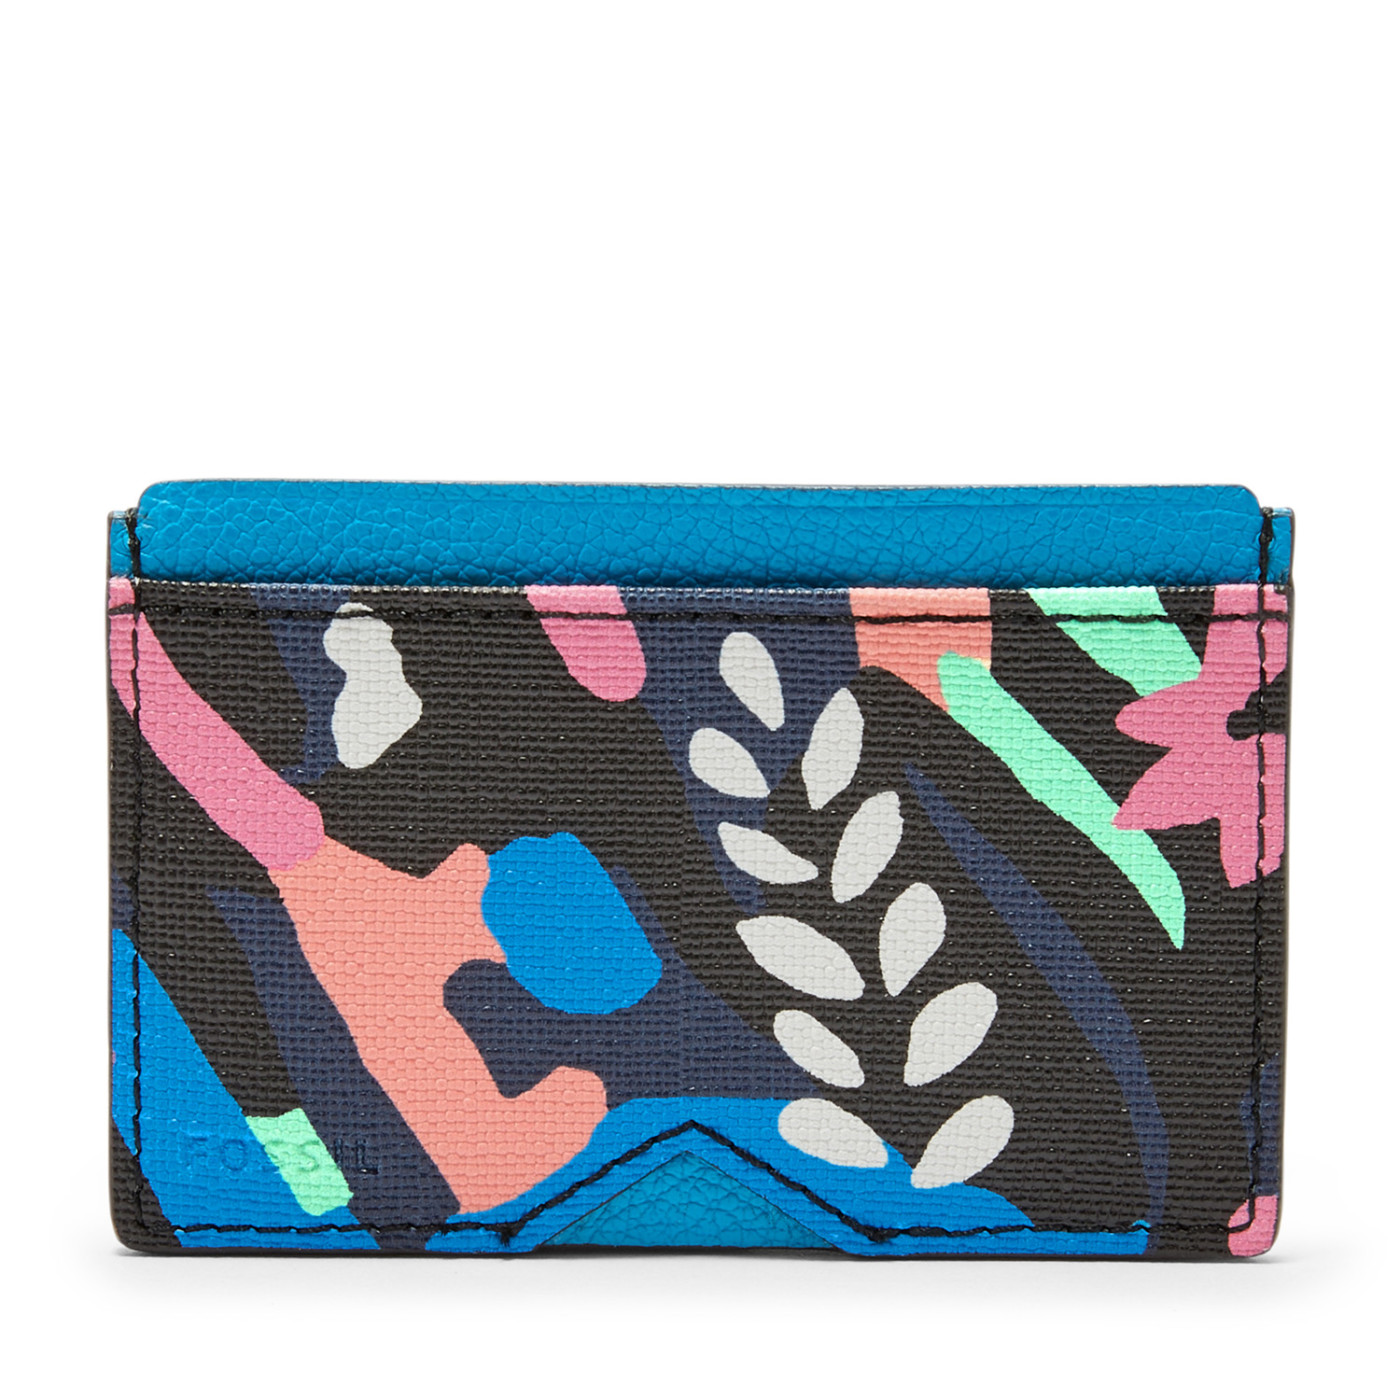 woocommerce-673321-2209615.cloudwaysapps.com-fossil-womens-black-floral-leather-card-holder-case